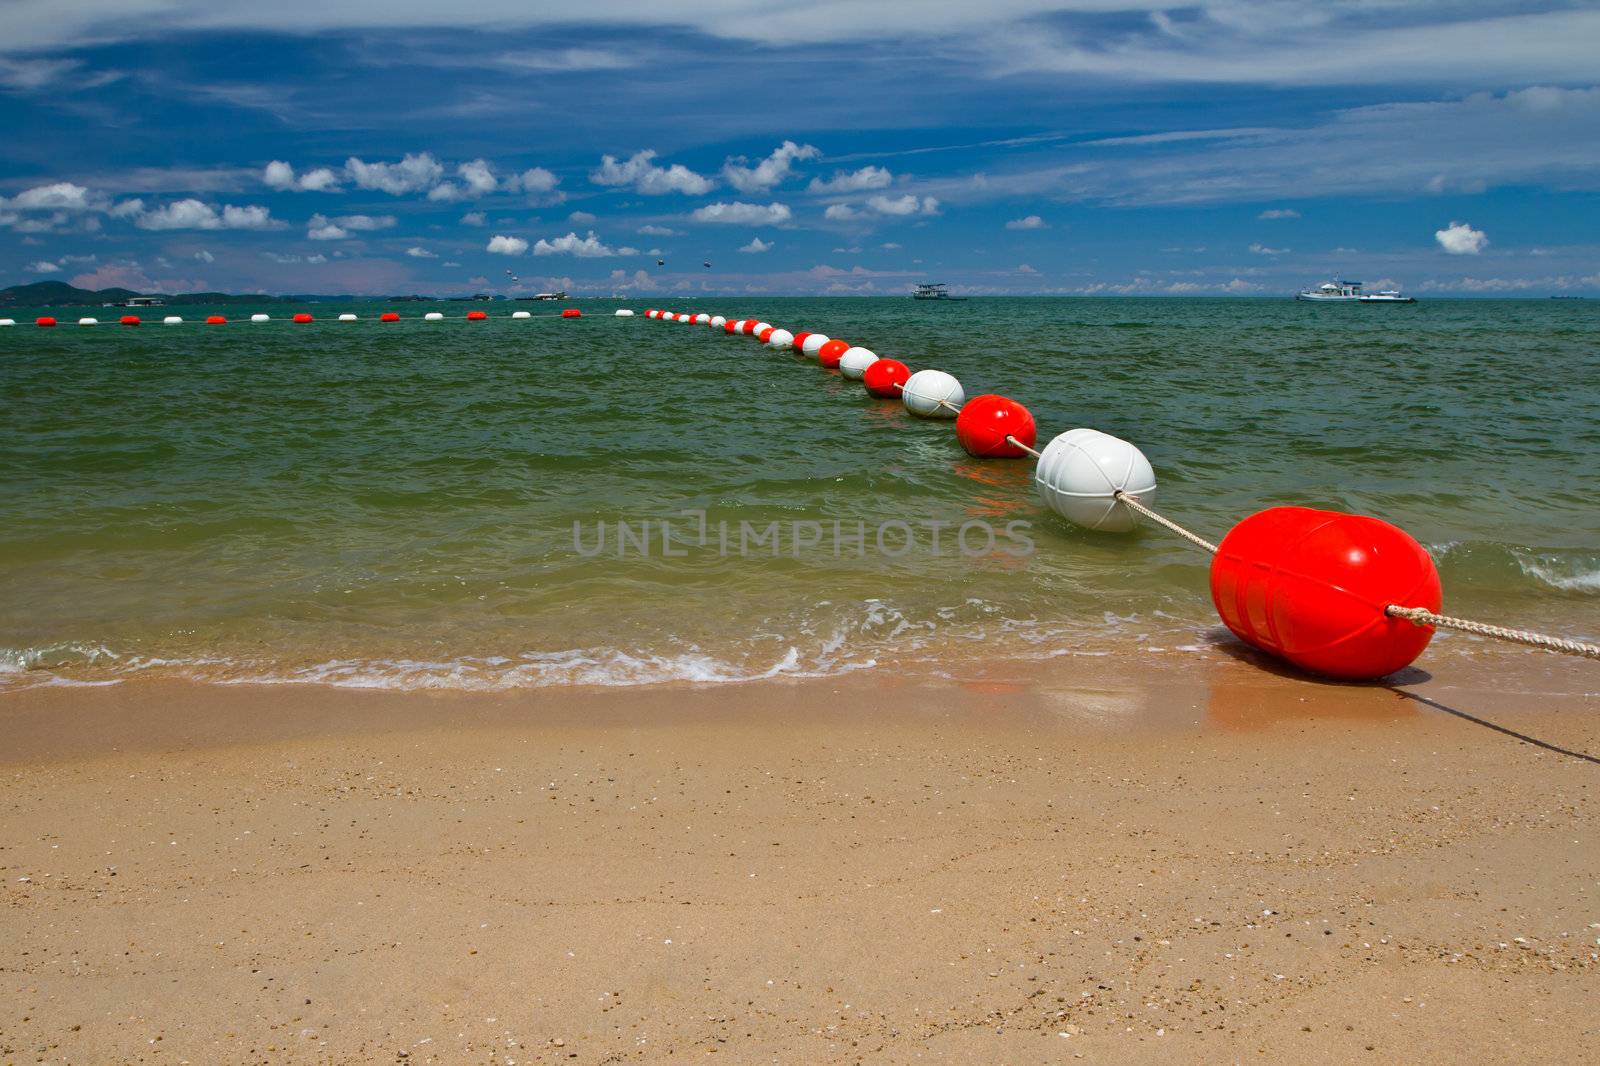 The Buoys to swimmer protection at pattaya beach,Thailand